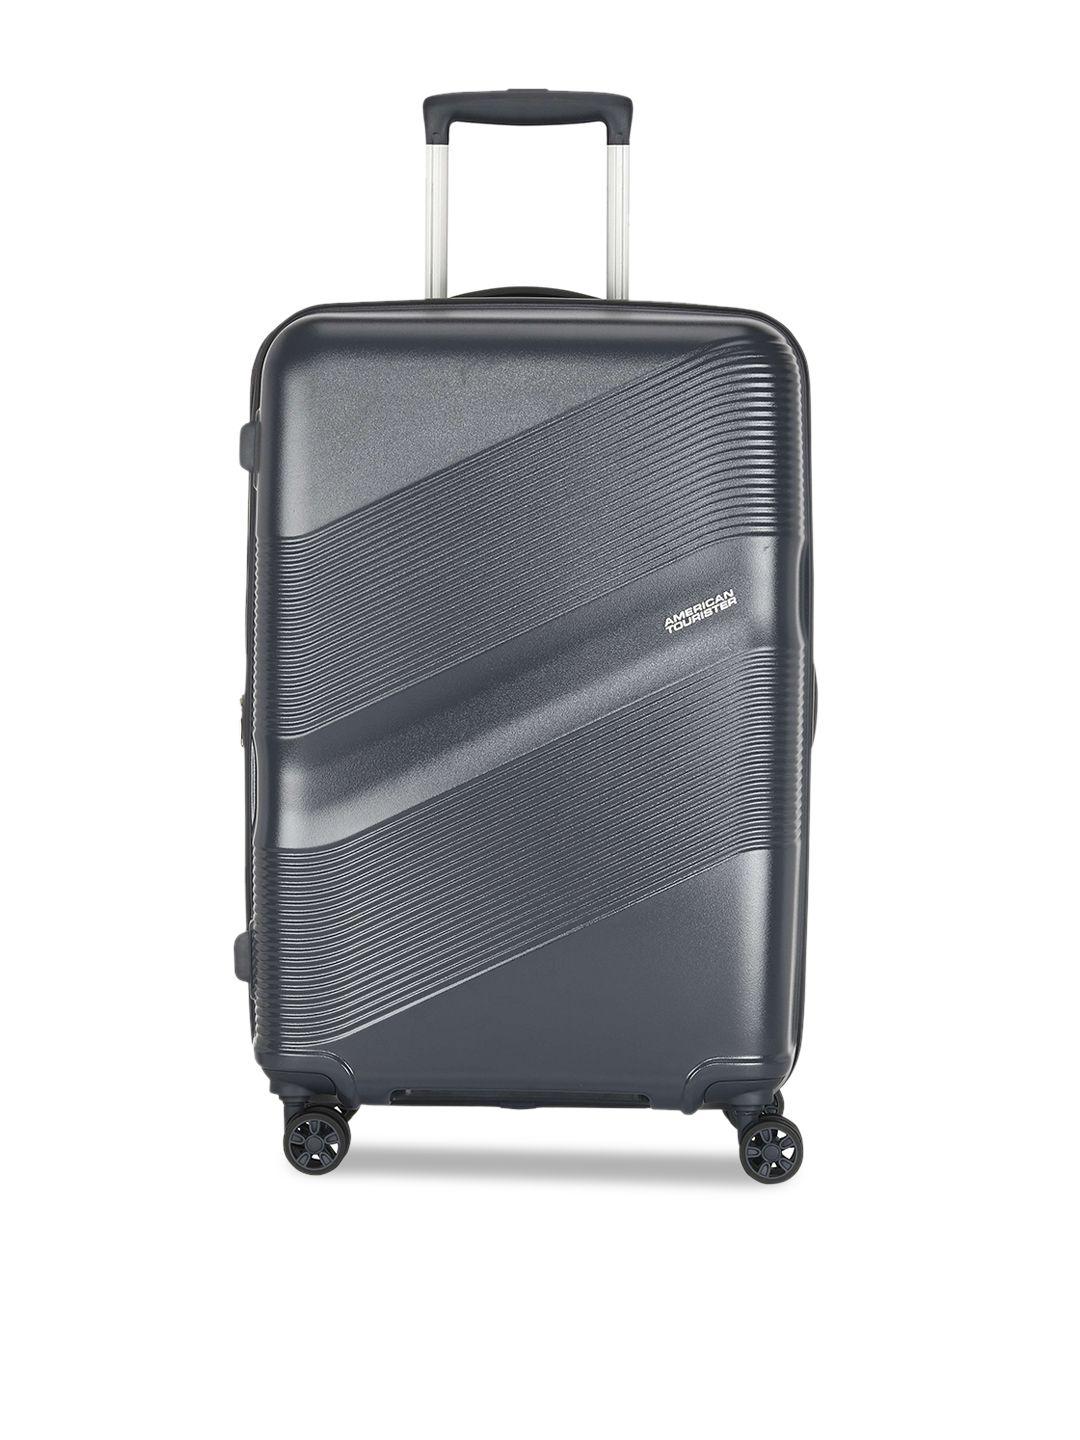 american-tourister-krypton-textured-hard-sided-cabin-trolley-bag--55-cm